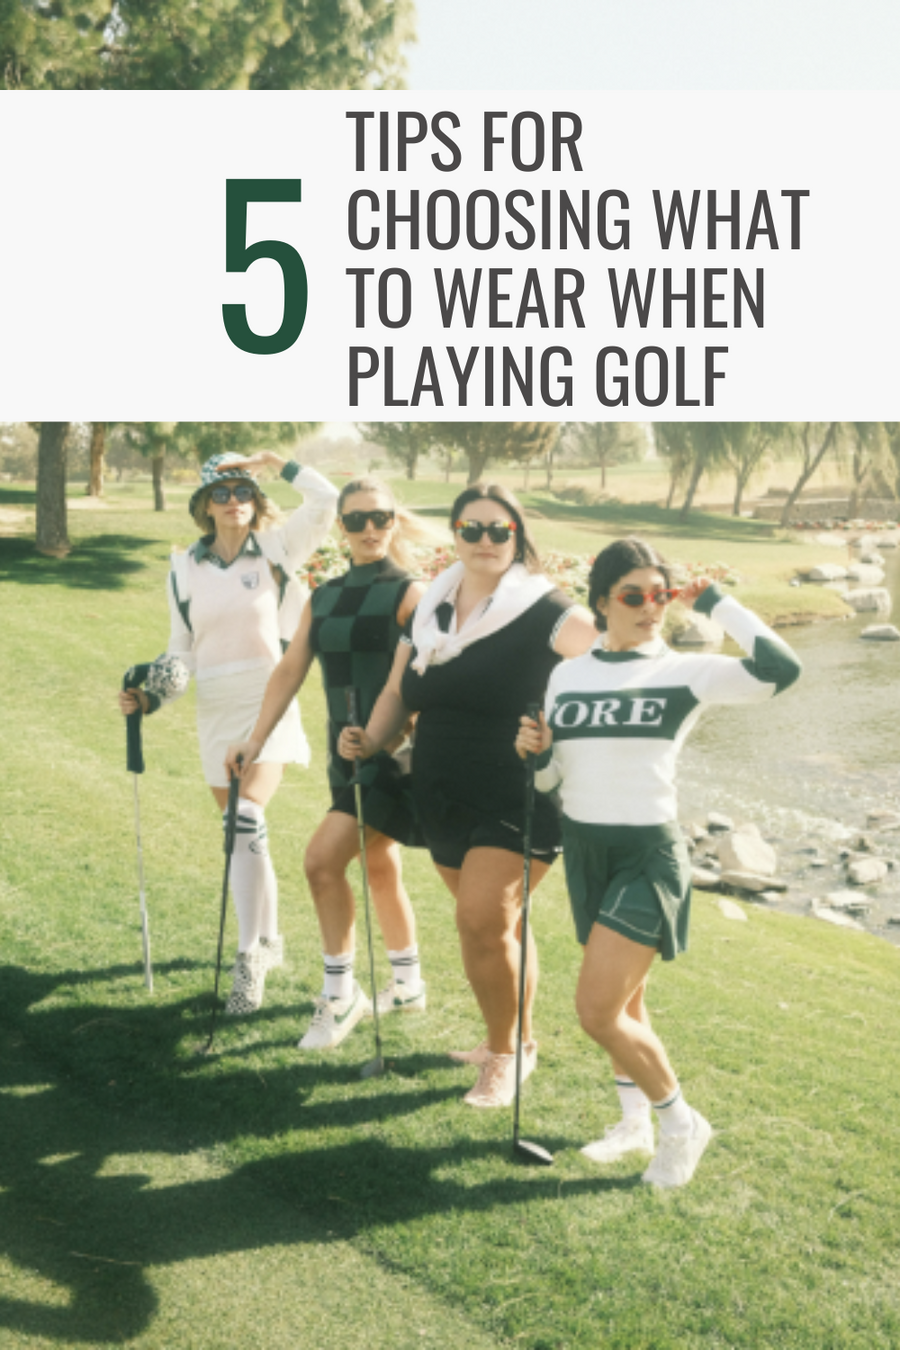 Top 5 Tips For Choosing What To Wear When Playing Golf